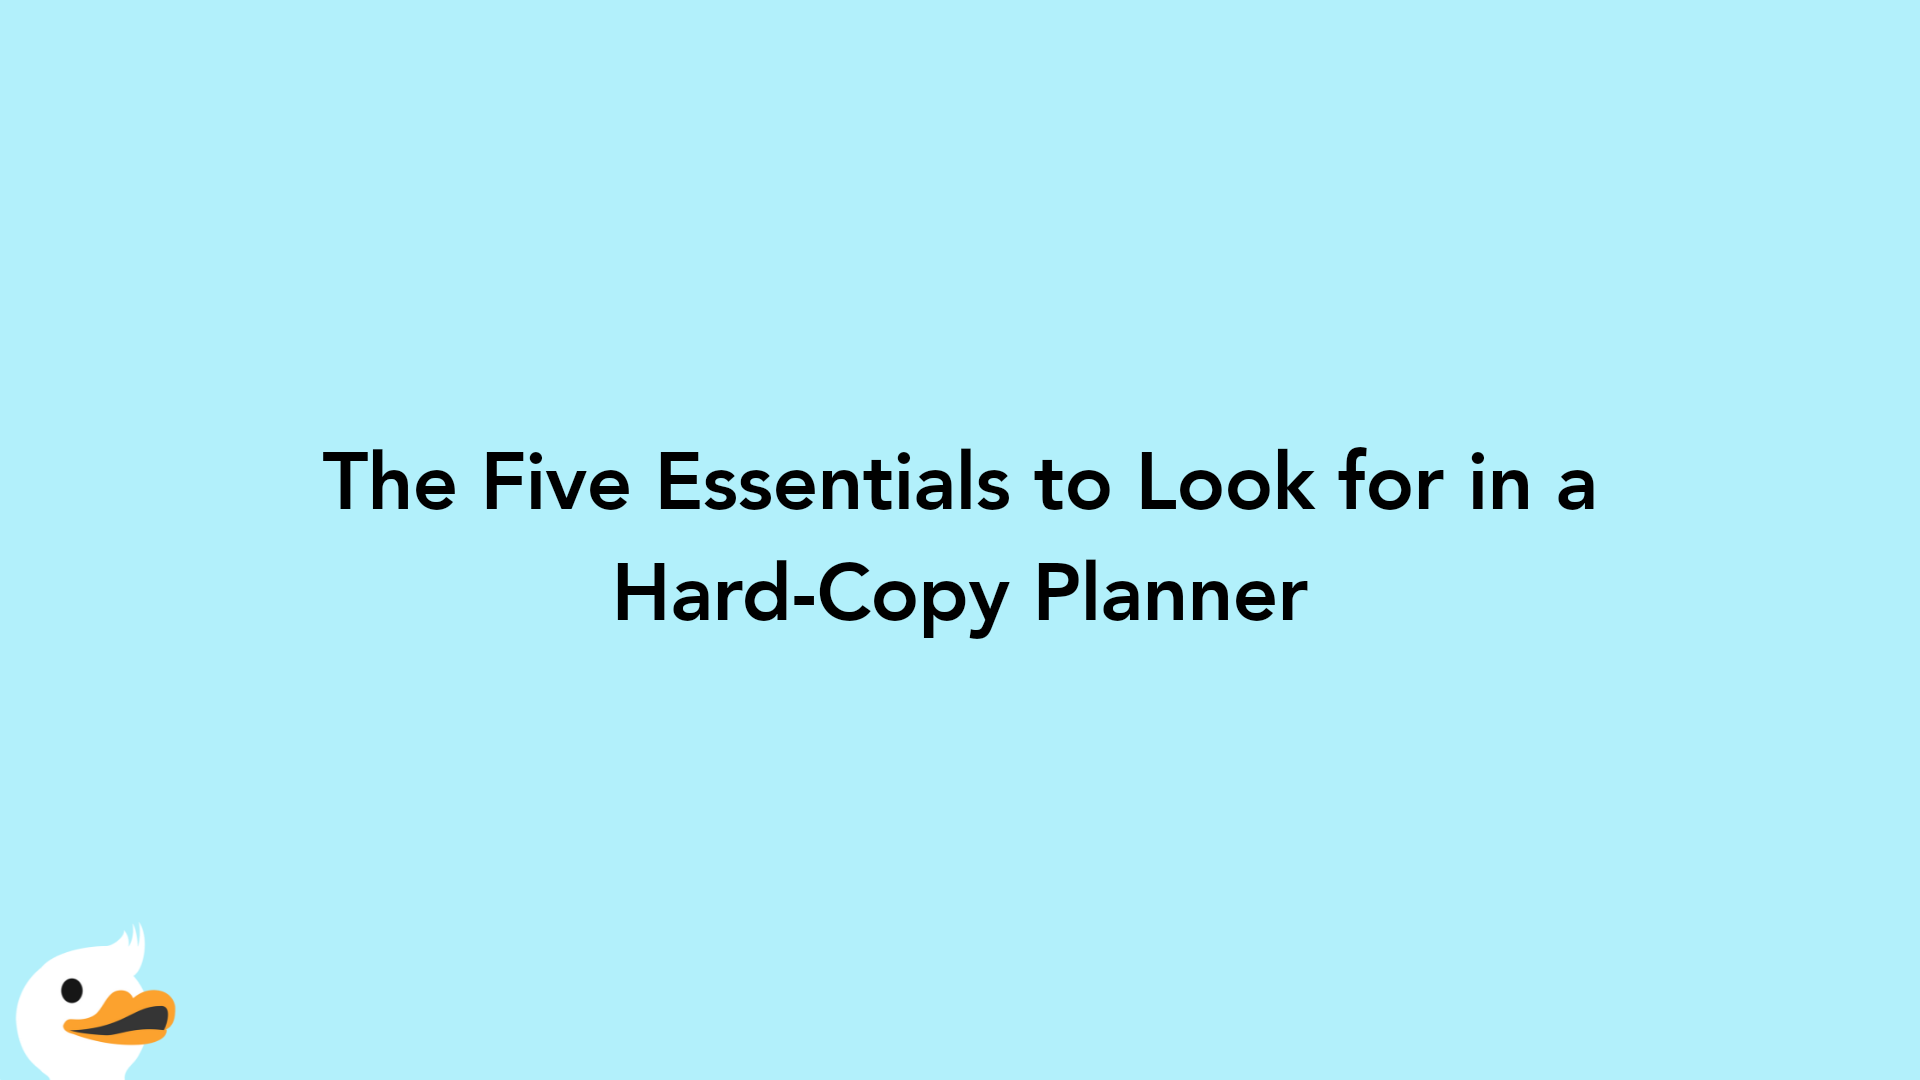 The Five Essentials to Look for in a Hard-Copy Planner